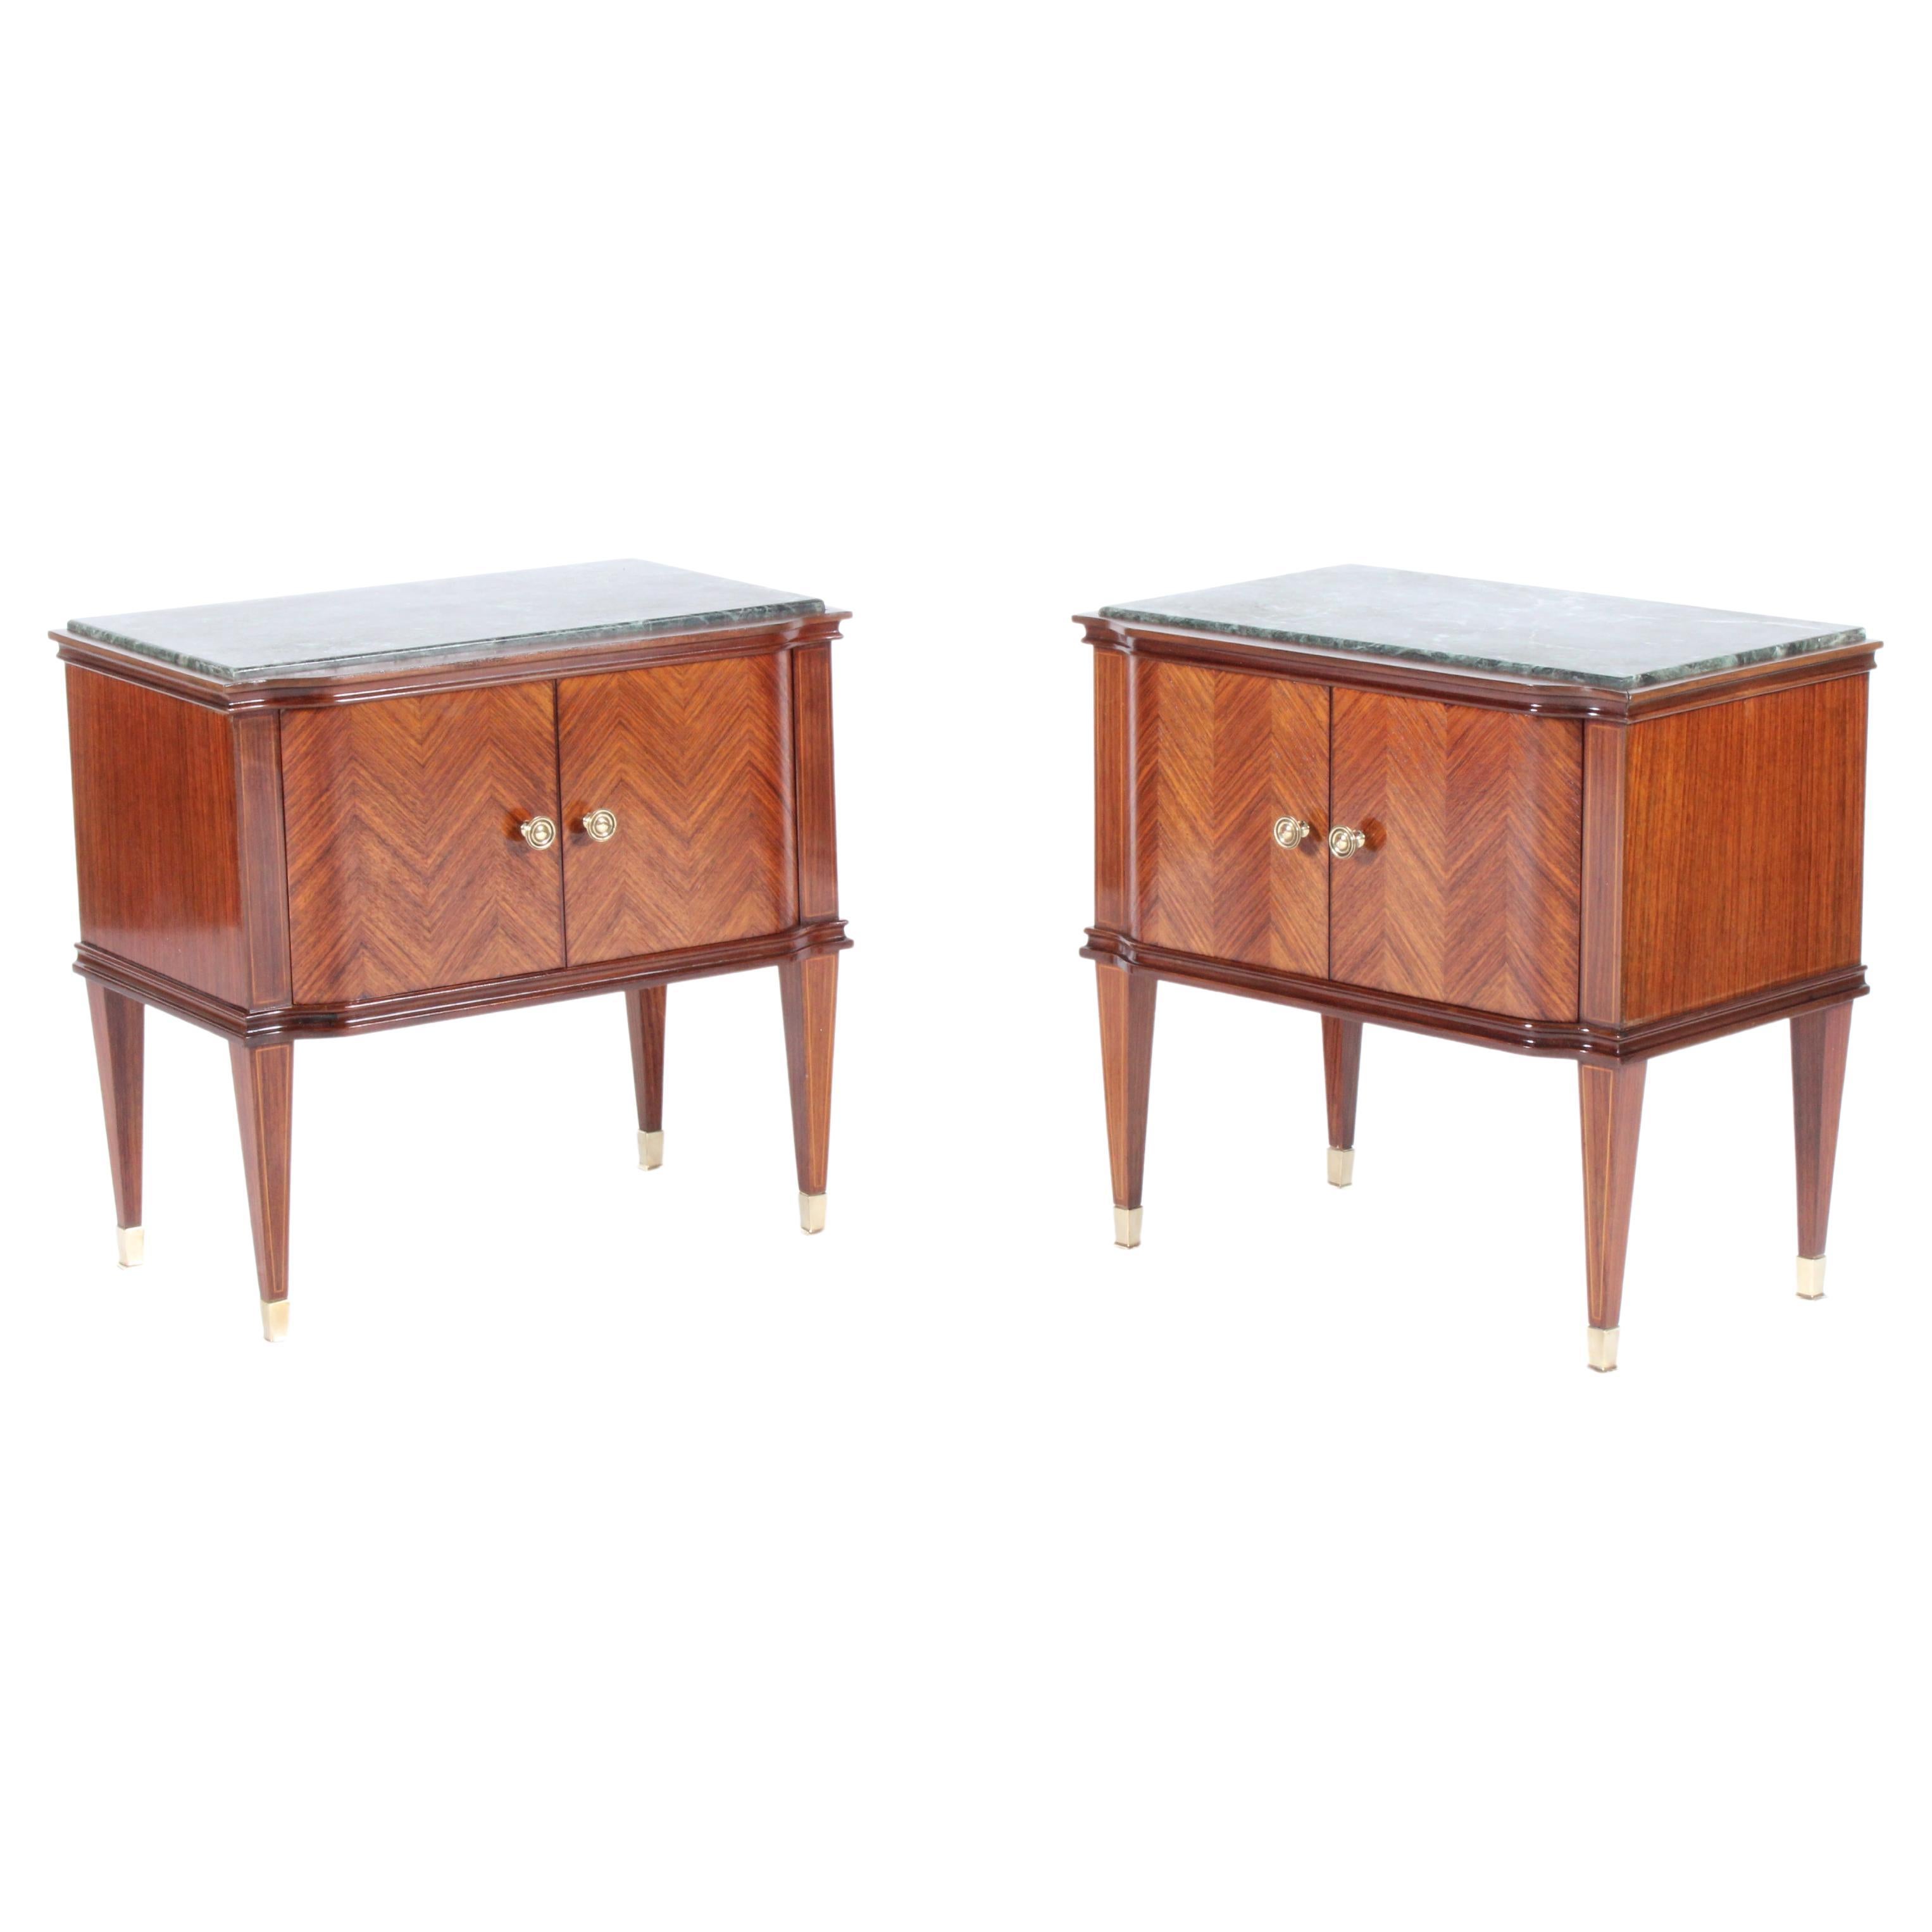 Exquisite Pair of Midcentury Italian Night Stands with Green Marble Tops